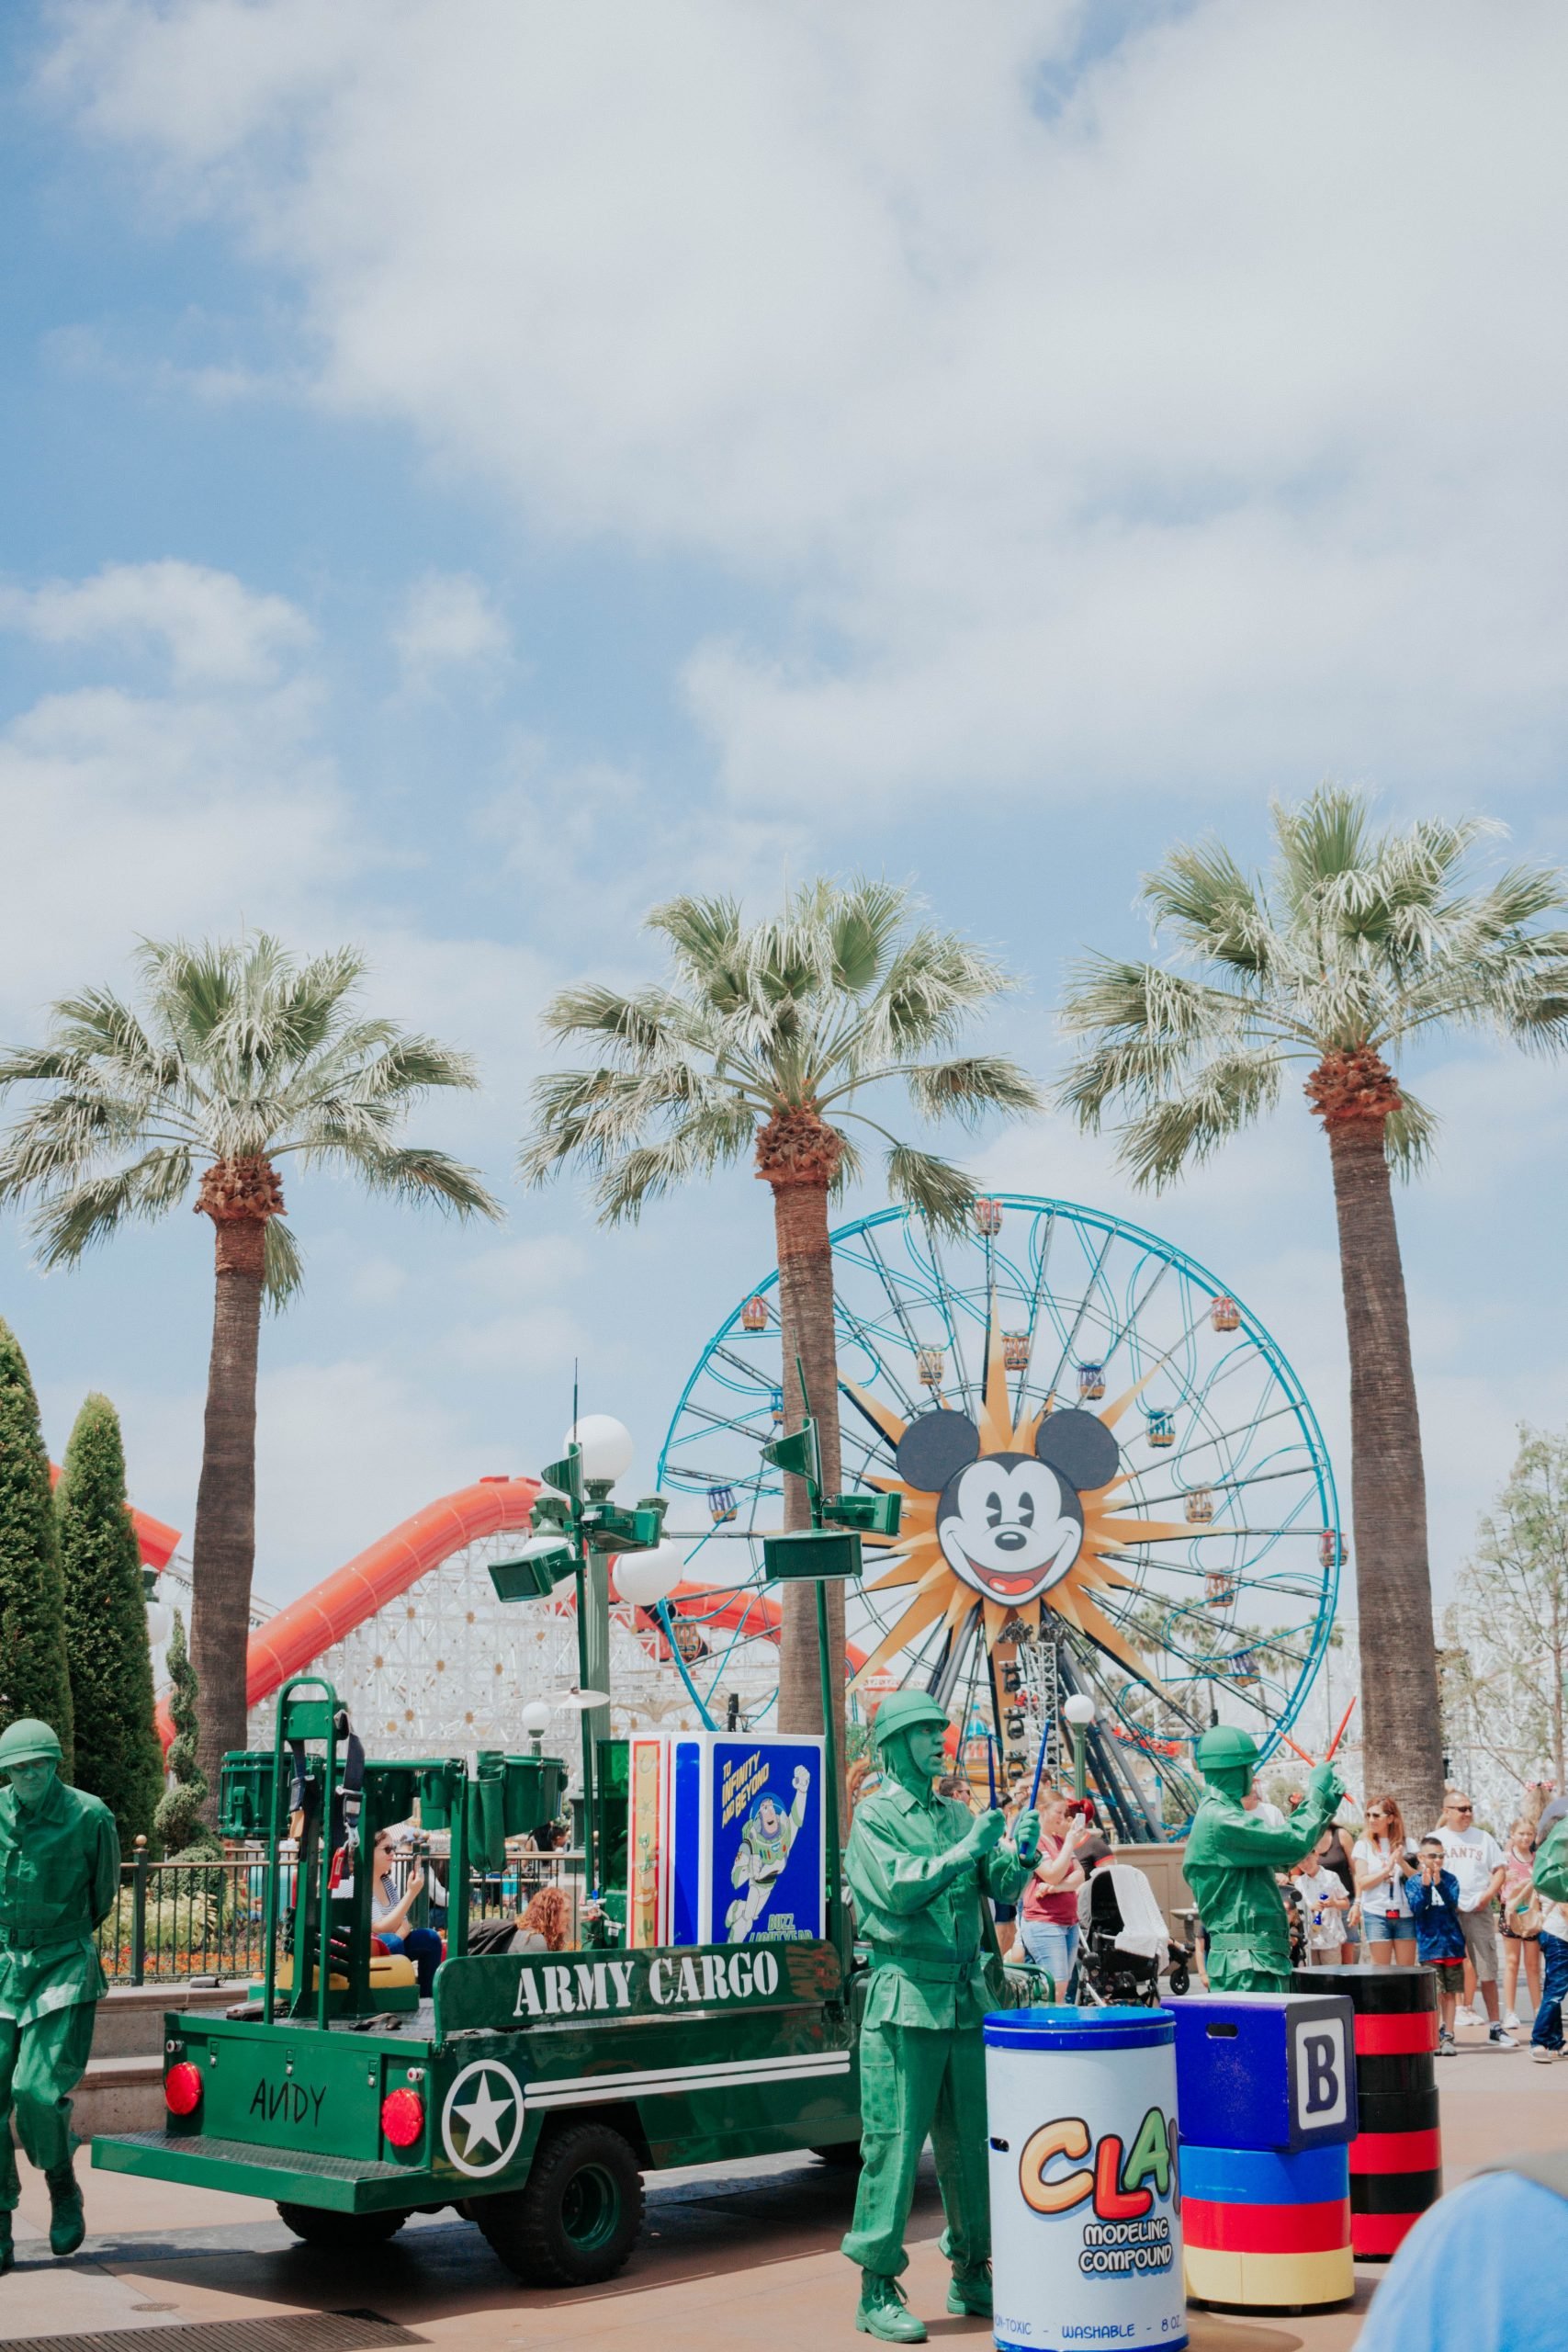 How To Get From Long Beach Airport To Disneyland - All Possible Ways, cheapest way from Long Beach airport to Disneyland, Long Beach airport to Disneyland, Long Beach Bus Airport Disneyland, Long Beach Airport Bus To Anaheim and Disneyland, Long Beach to Disneyland